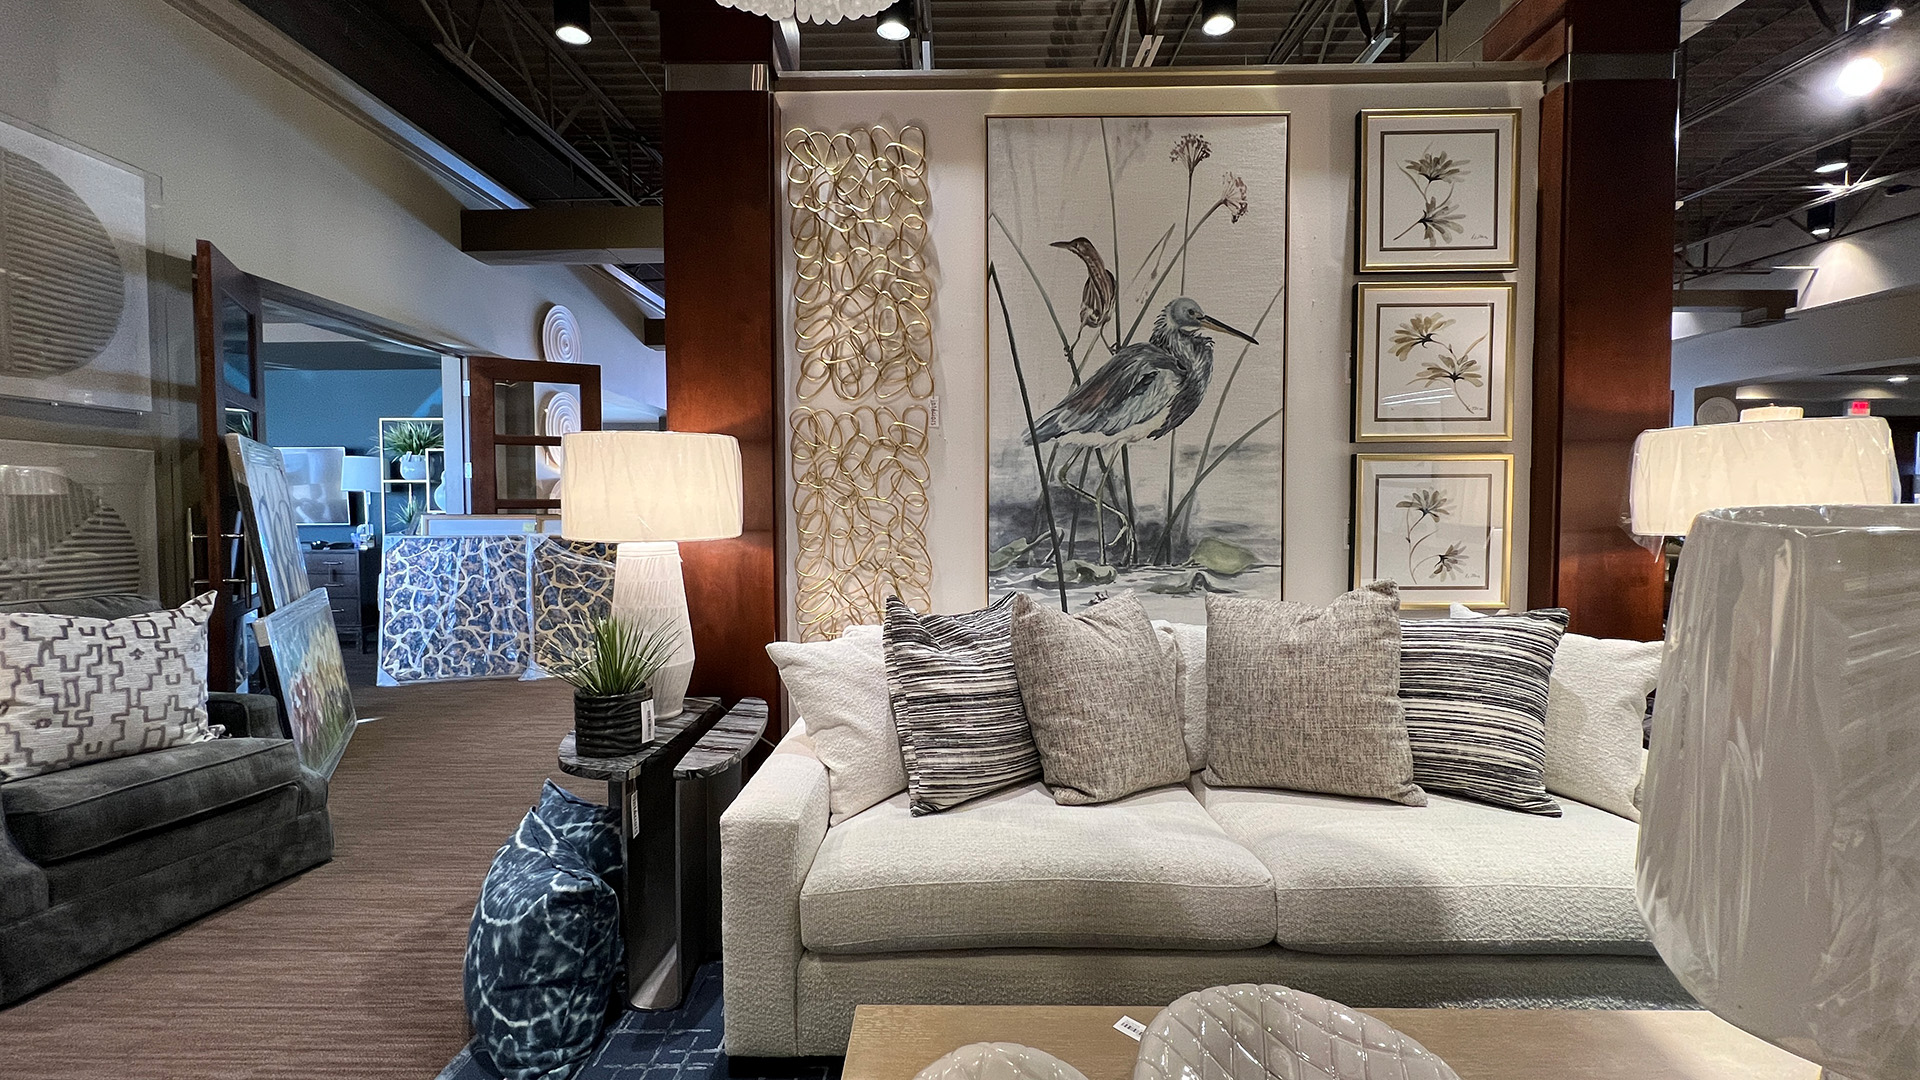 Explore our Omaha and Lincoln showrooms for interior design inspiration with Interiors Joan and Associates